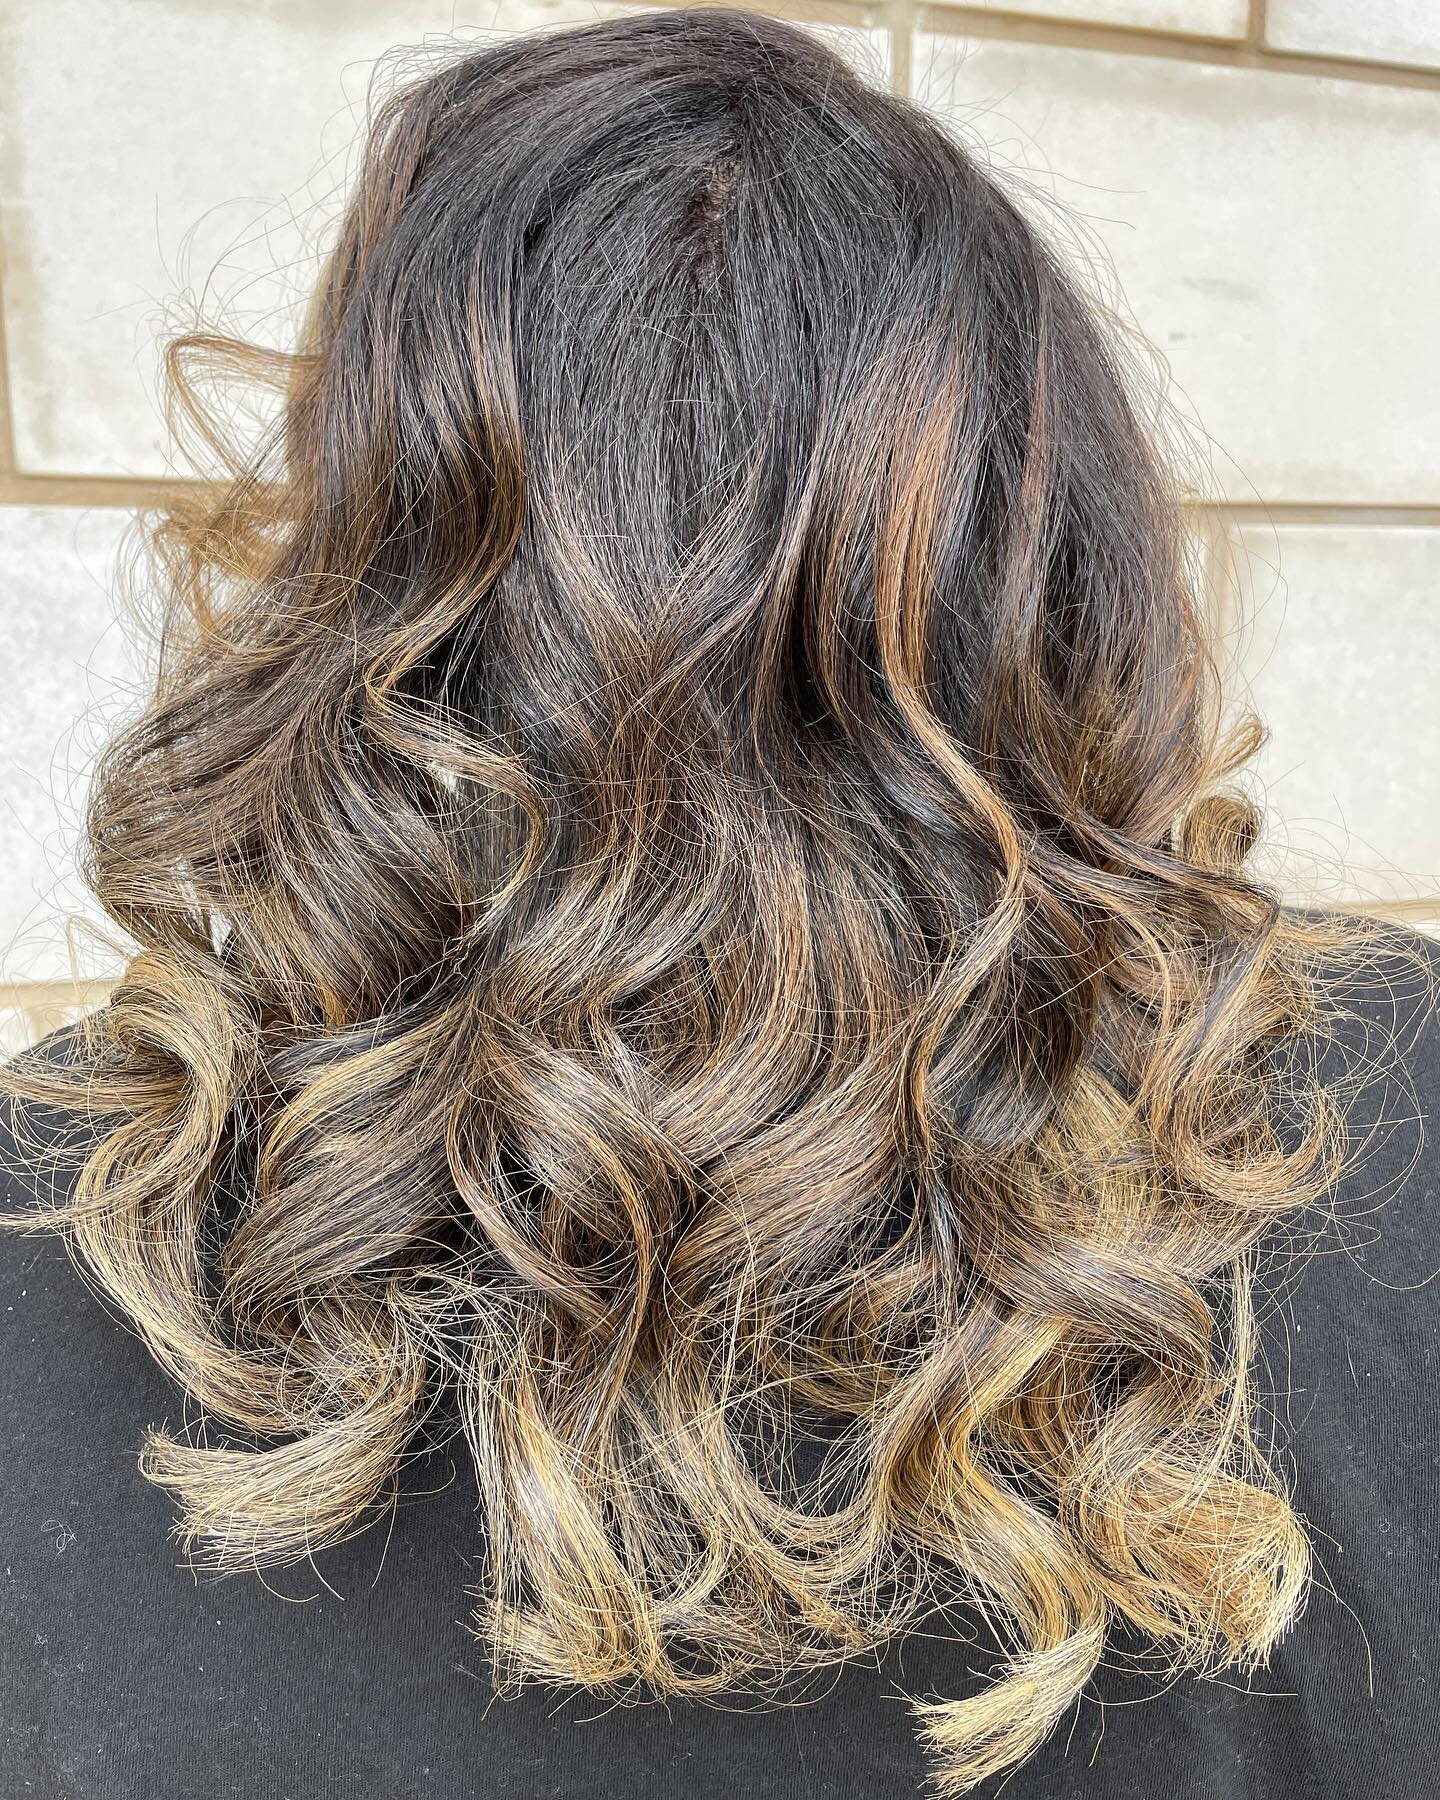 Shout out to @kristen.lumiere for great education and teaching a simplified way of coloring hair with great results! #lumierelabftw #balayagehair #behindthechair #behindthescenes #dallashaircolorist #dimensionalhaircolor #healthycoloredhair #ittakesa